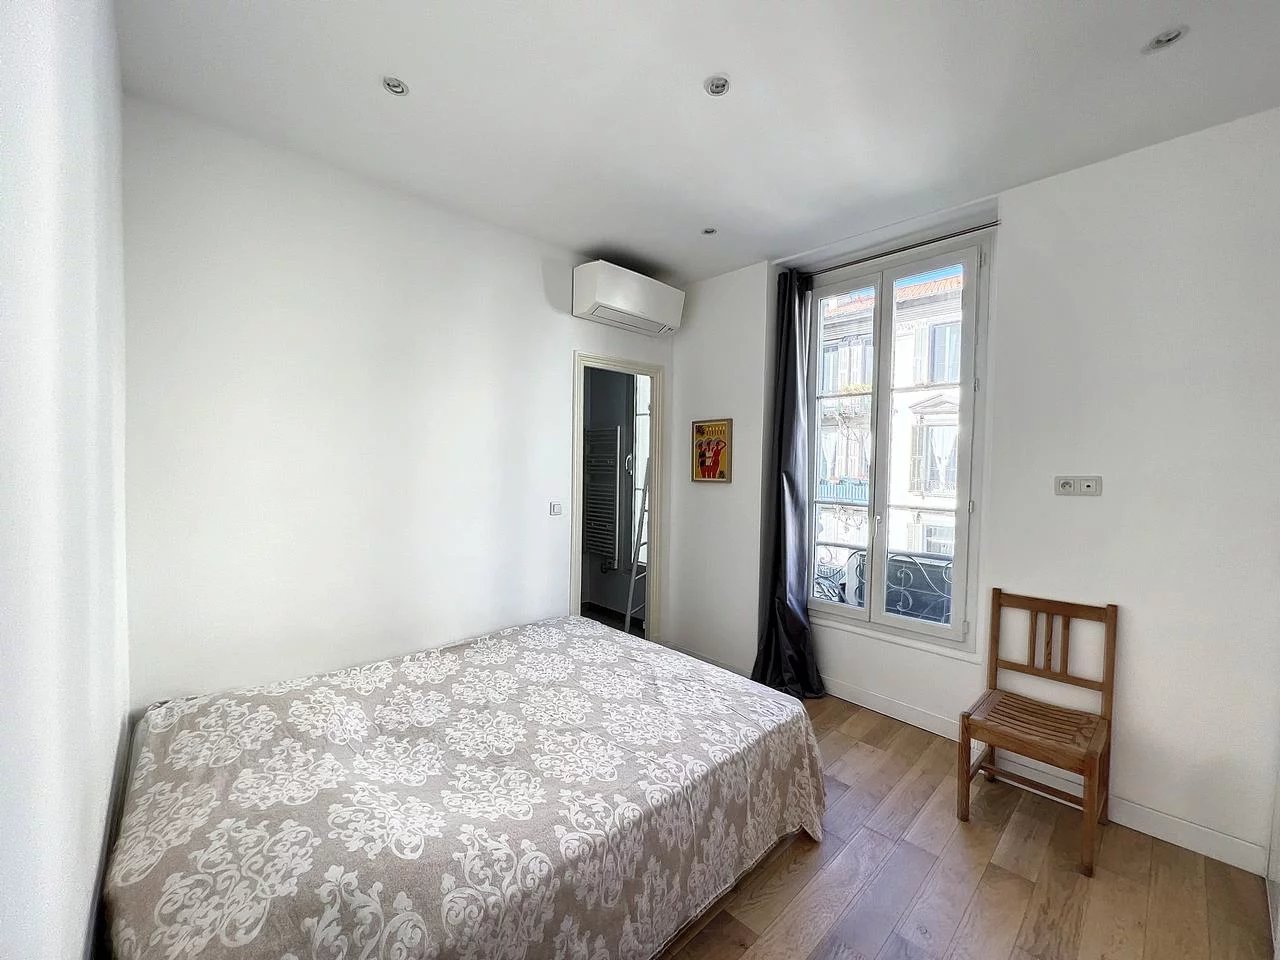 Appartement  2 Rooms 38m2  for sale   265 000 €